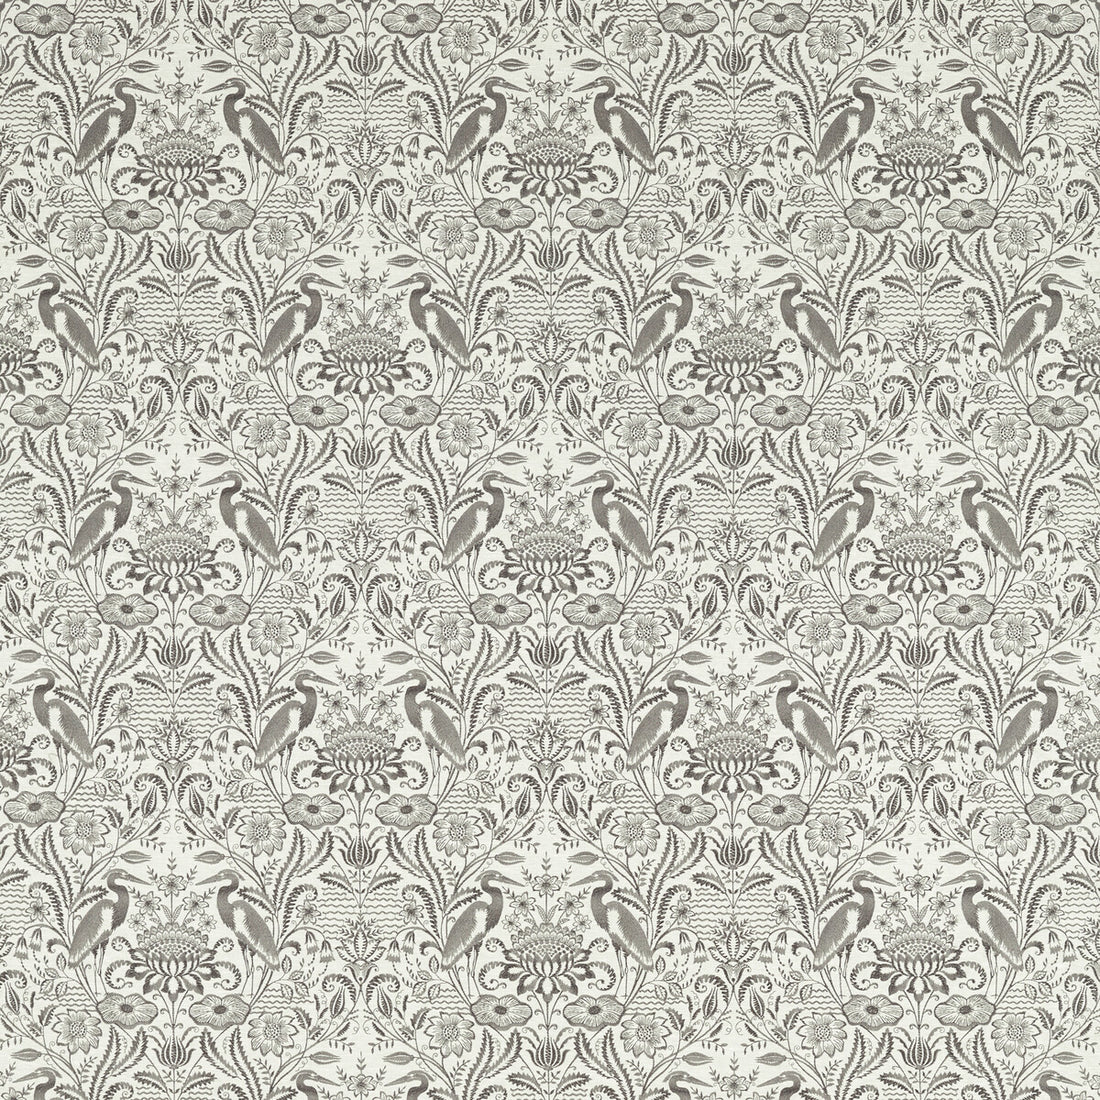 Nakuru fabric in charcoal/linen color - pattern F1547/02.CAC.0 - by Clarke And Clarke in the Clarke &amp; Clarke Vintage collection